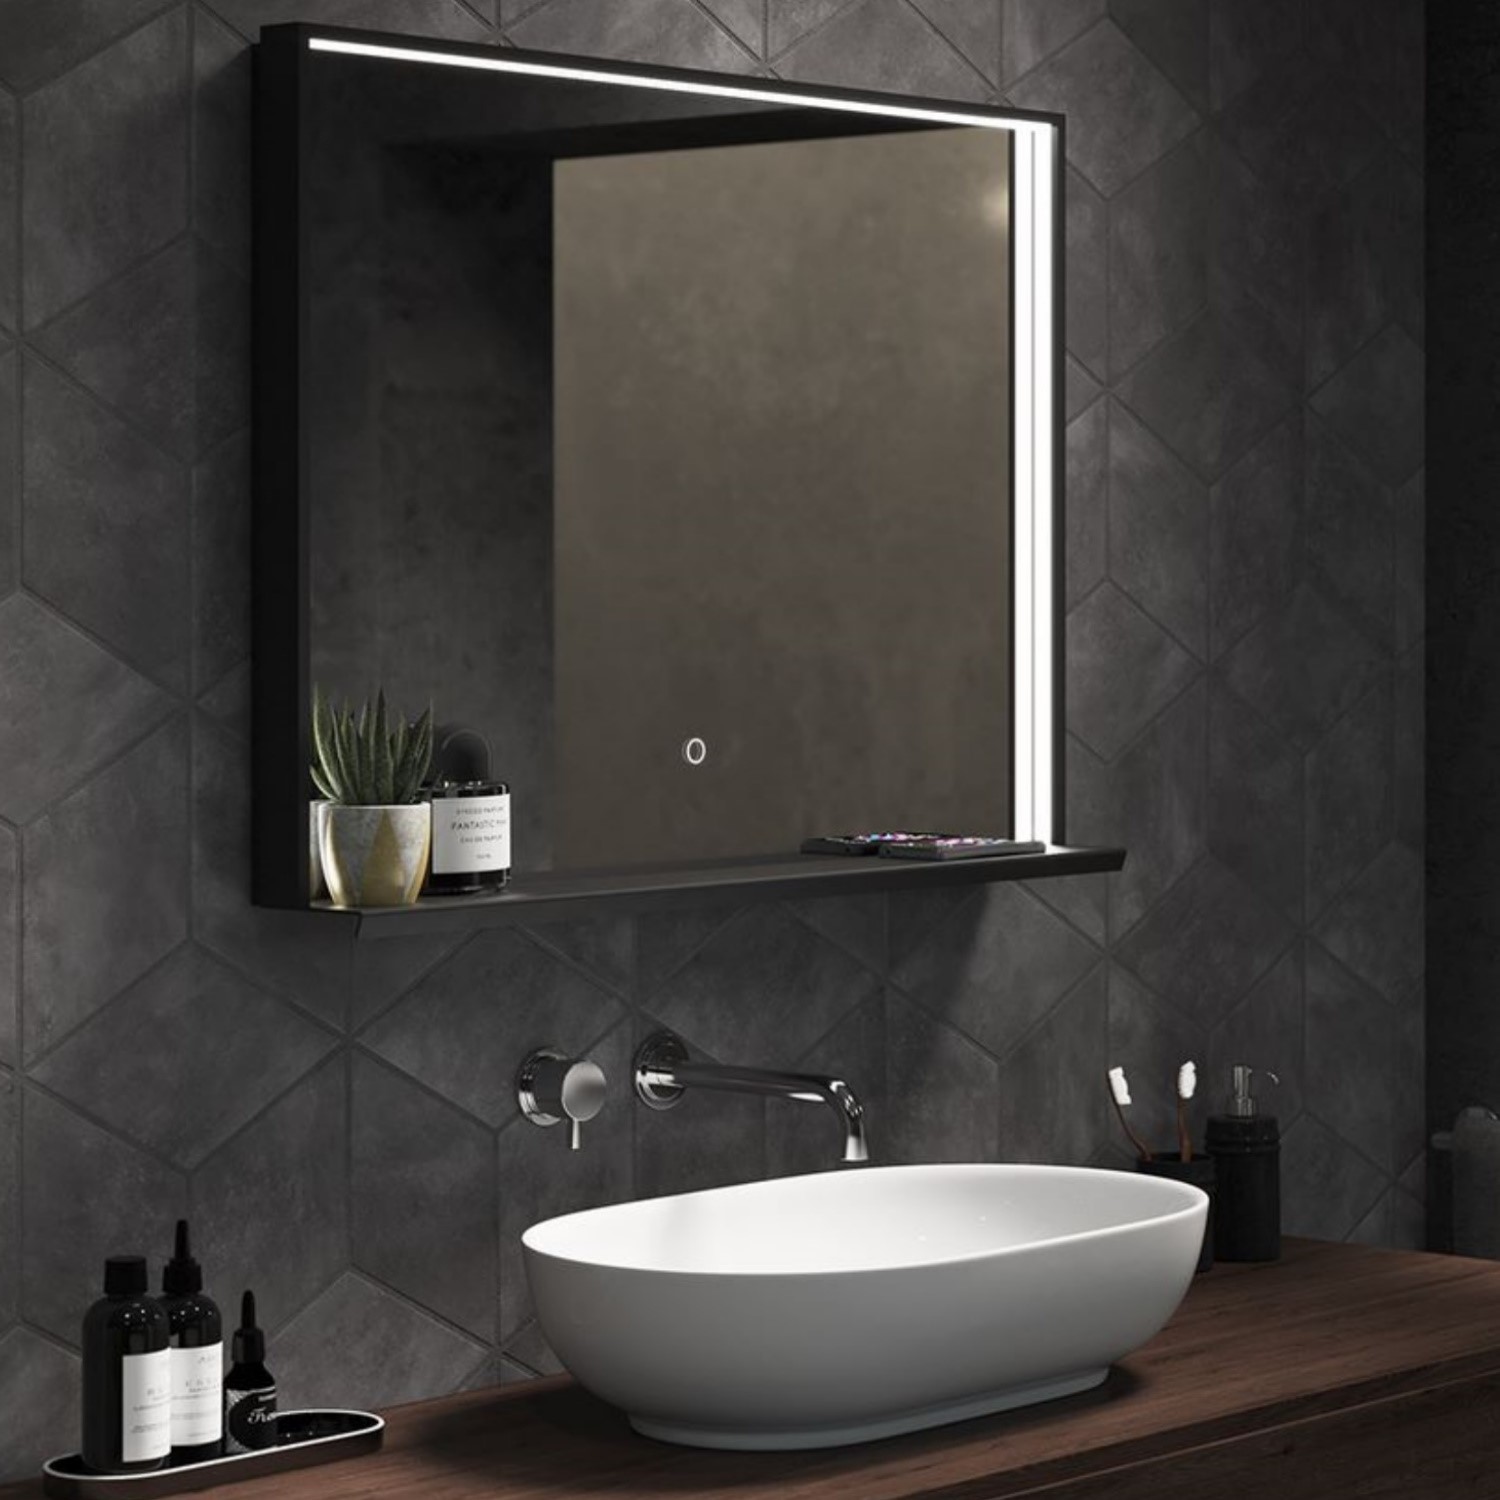 Rectangular Black LED Bathroom Mirror with Shelf and Charger 800 x 600mm - Sensio Element